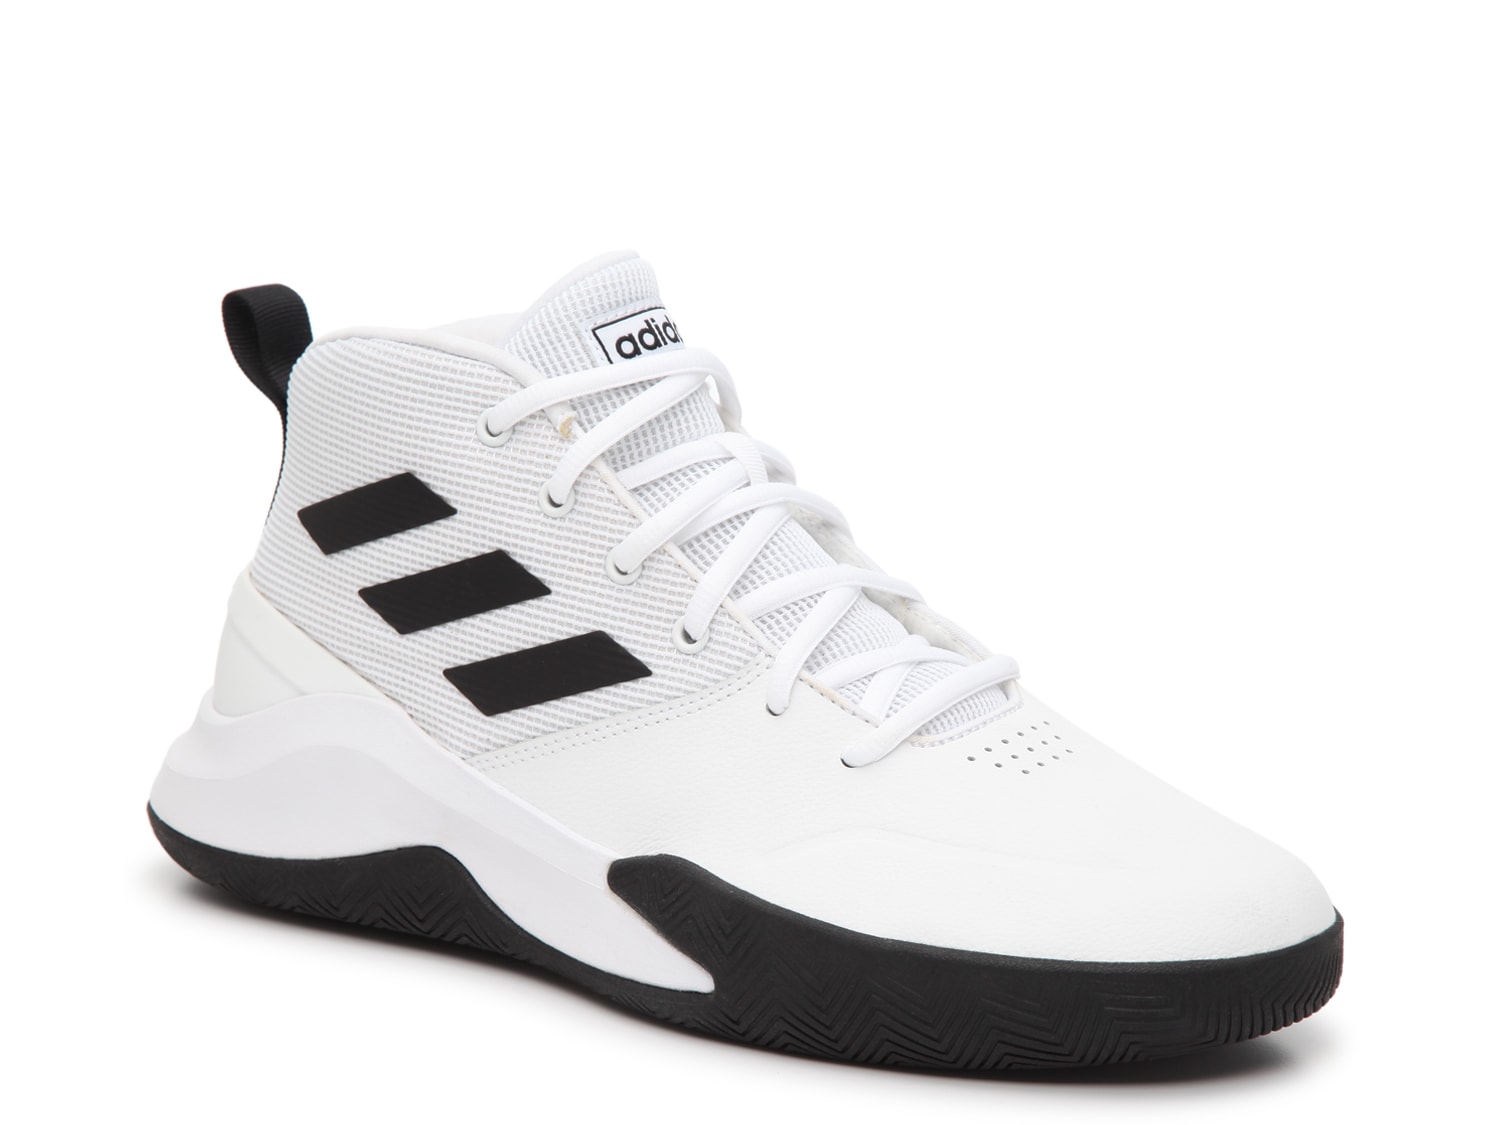 adidas ownthegame shoes